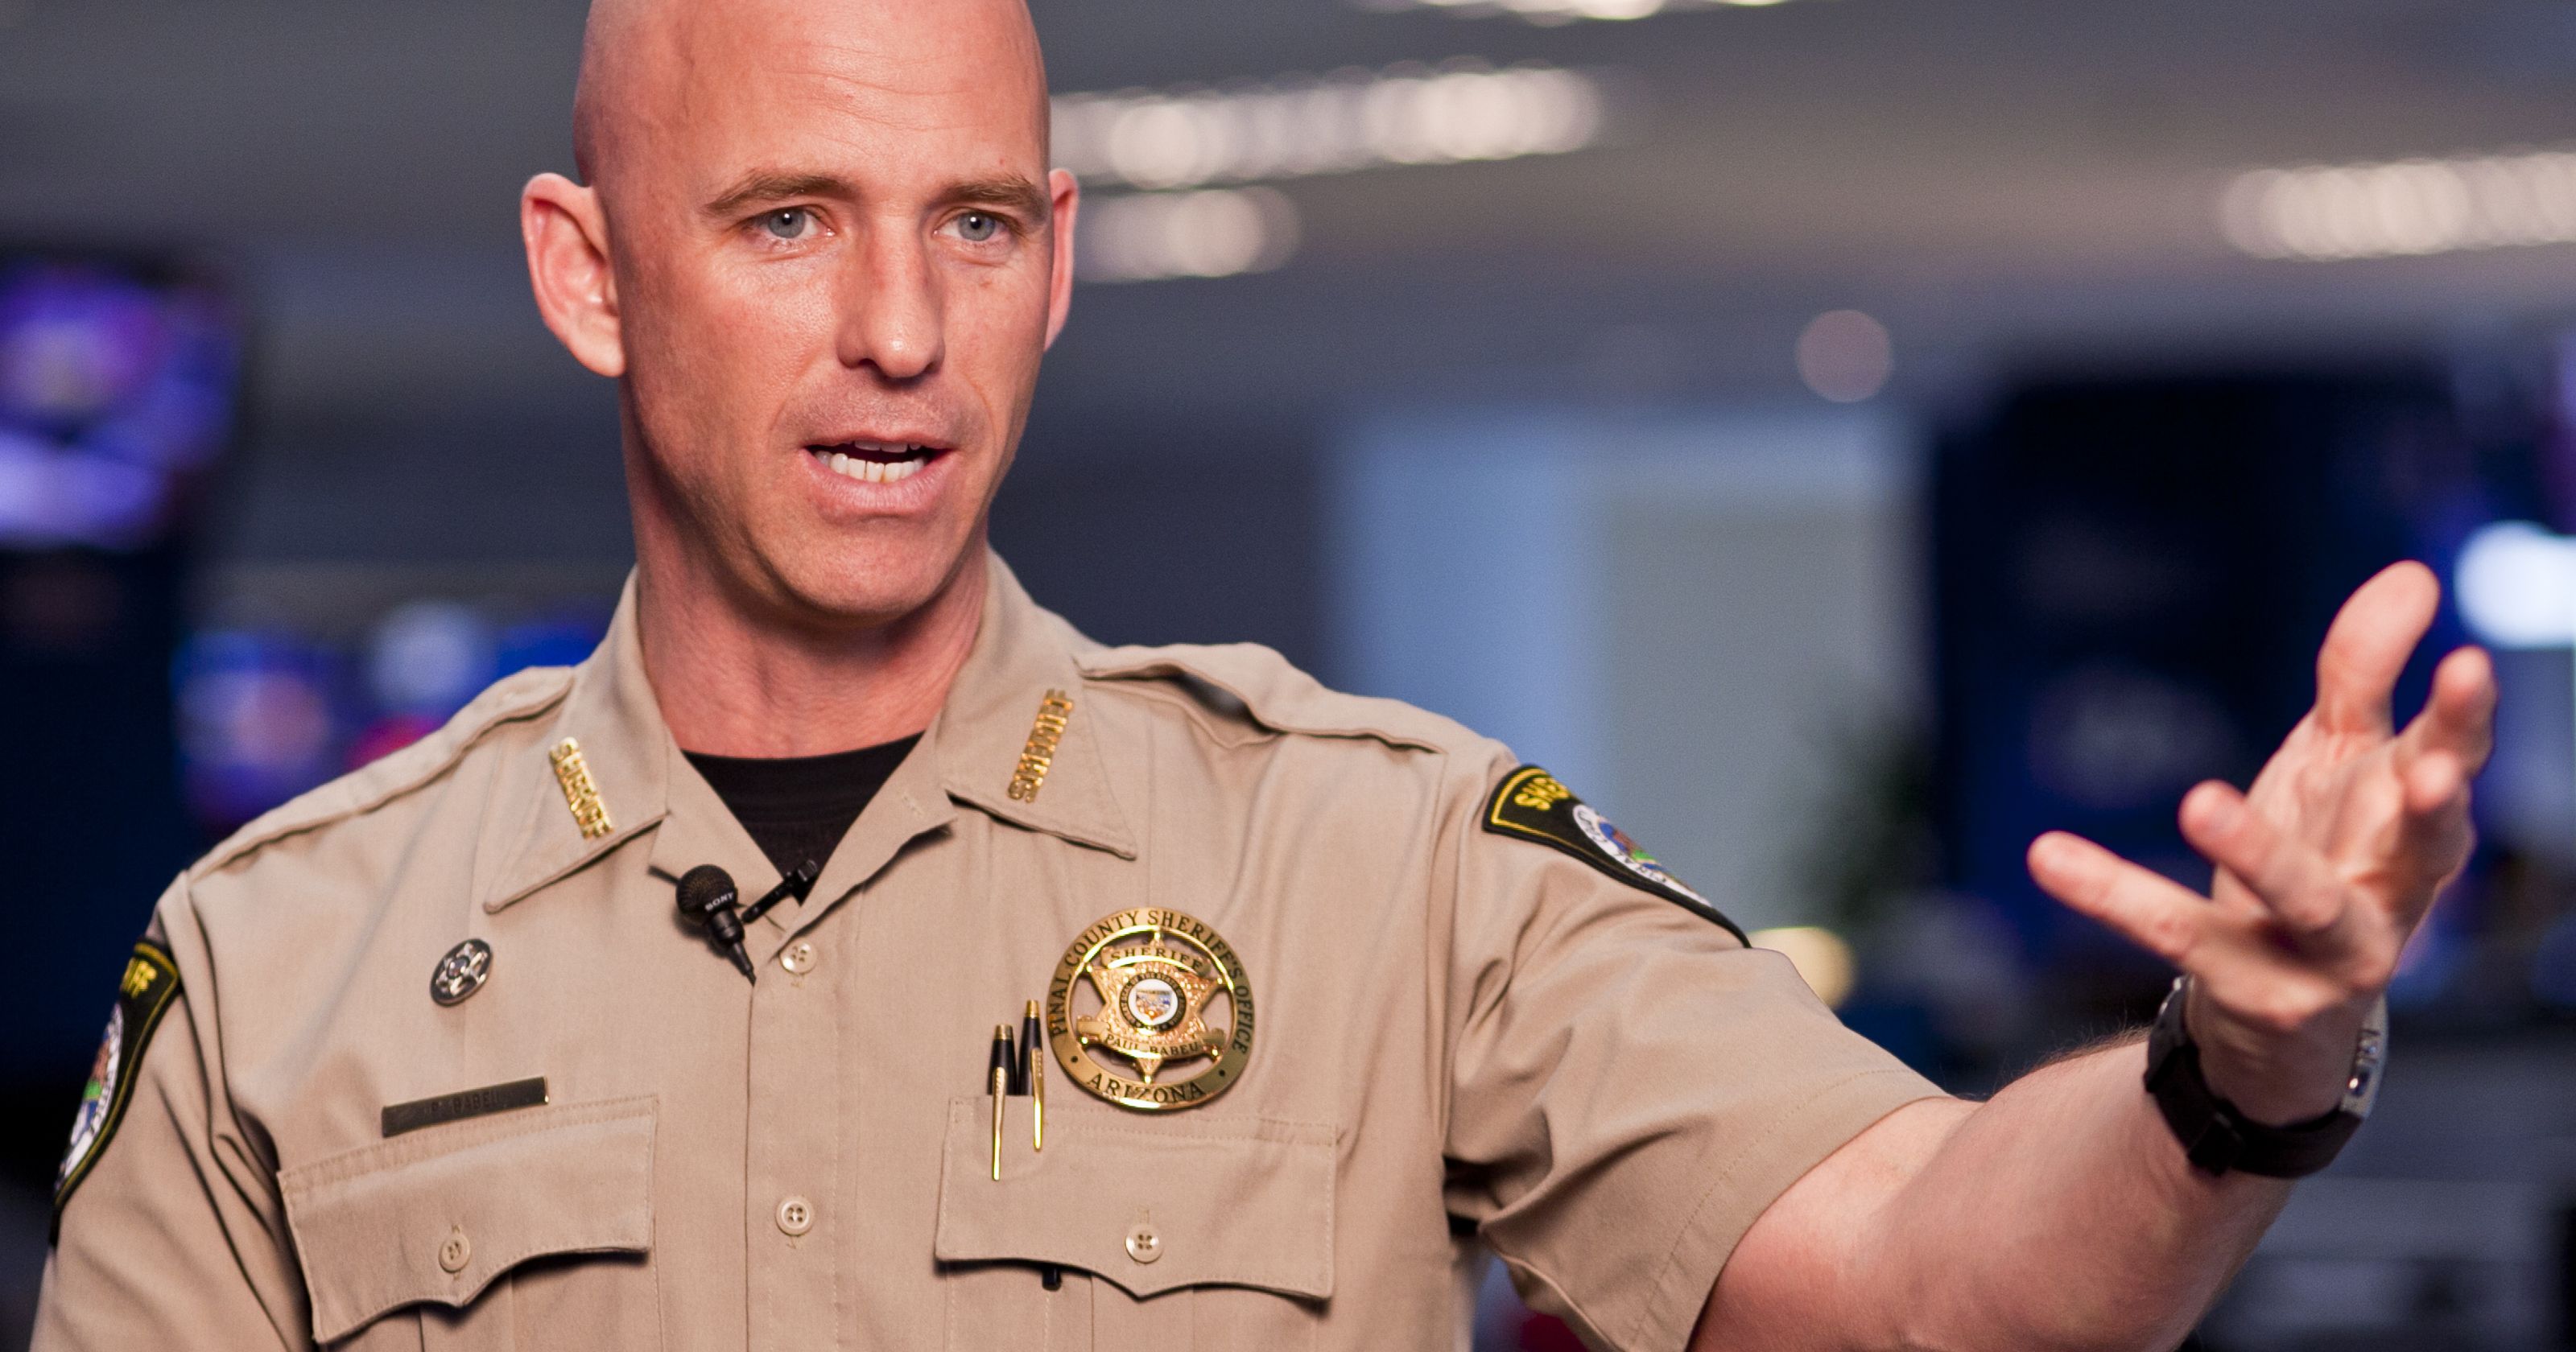 AZ Sheriff to Obama at Gun Control Town Hall Meeting I don’t Want Your Endorsement